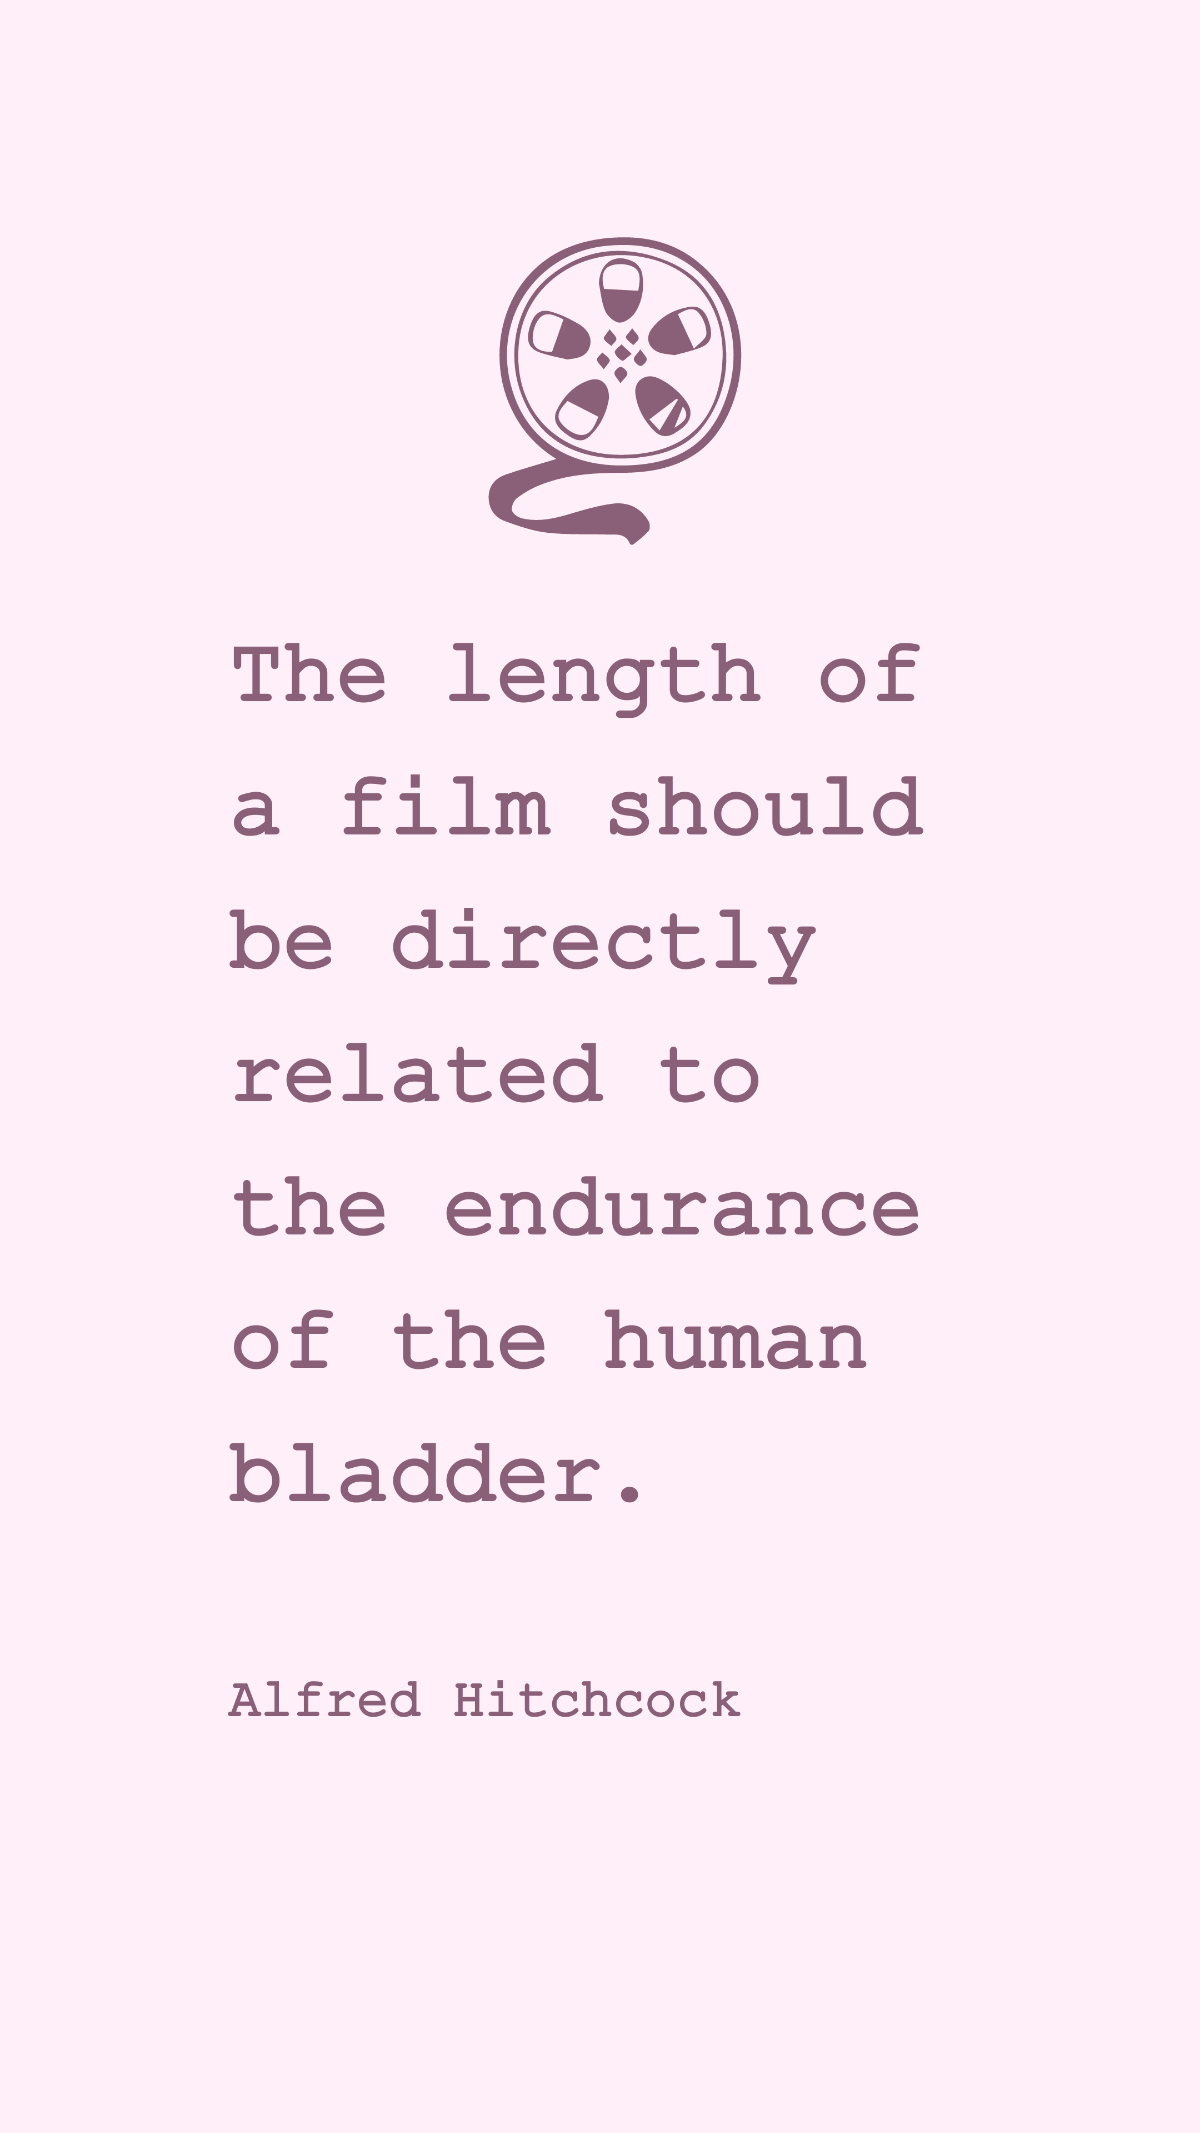 Free Alfred Hitchcock - The length of a film should be directly related to the endurance of the human bladder. Template